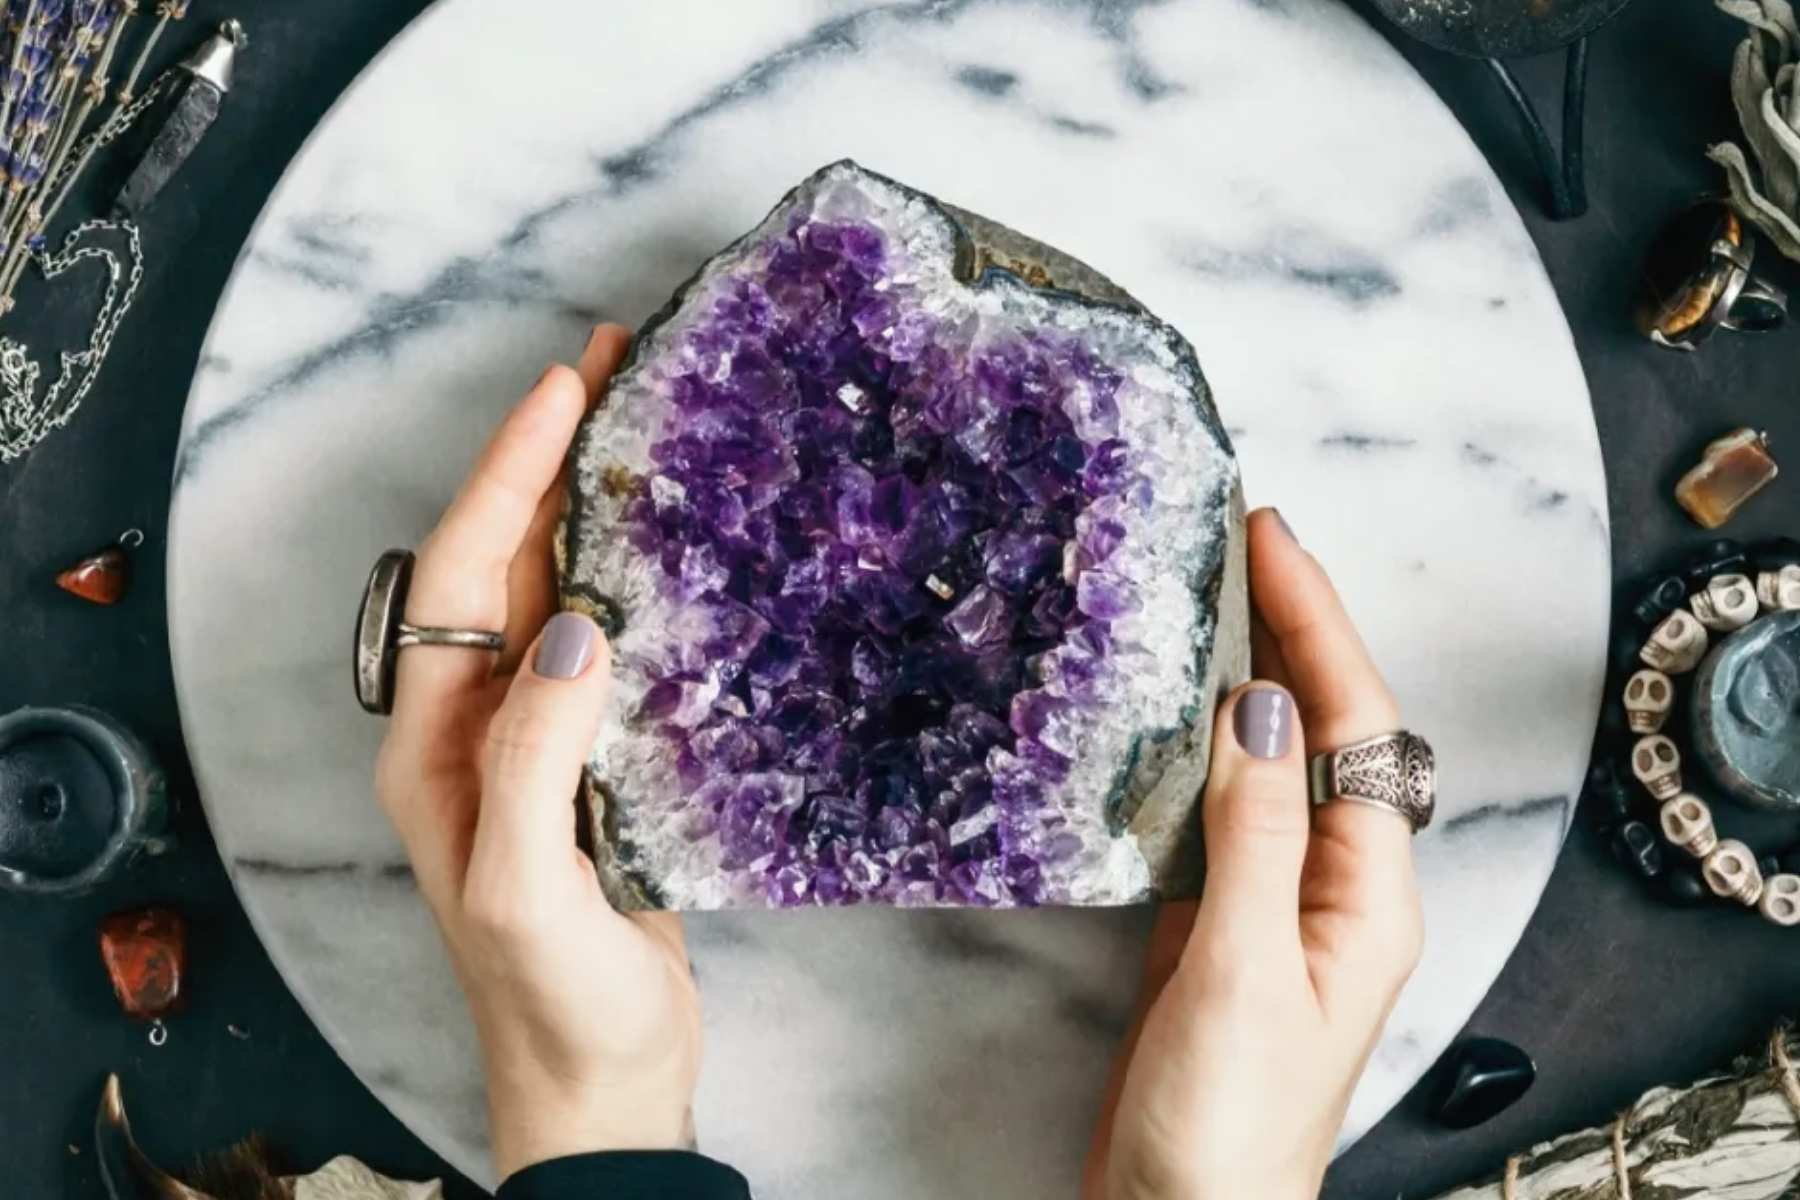 A photograph of a woman's hand grasping a large, unpolished amethyst crystal resting on a tabletop